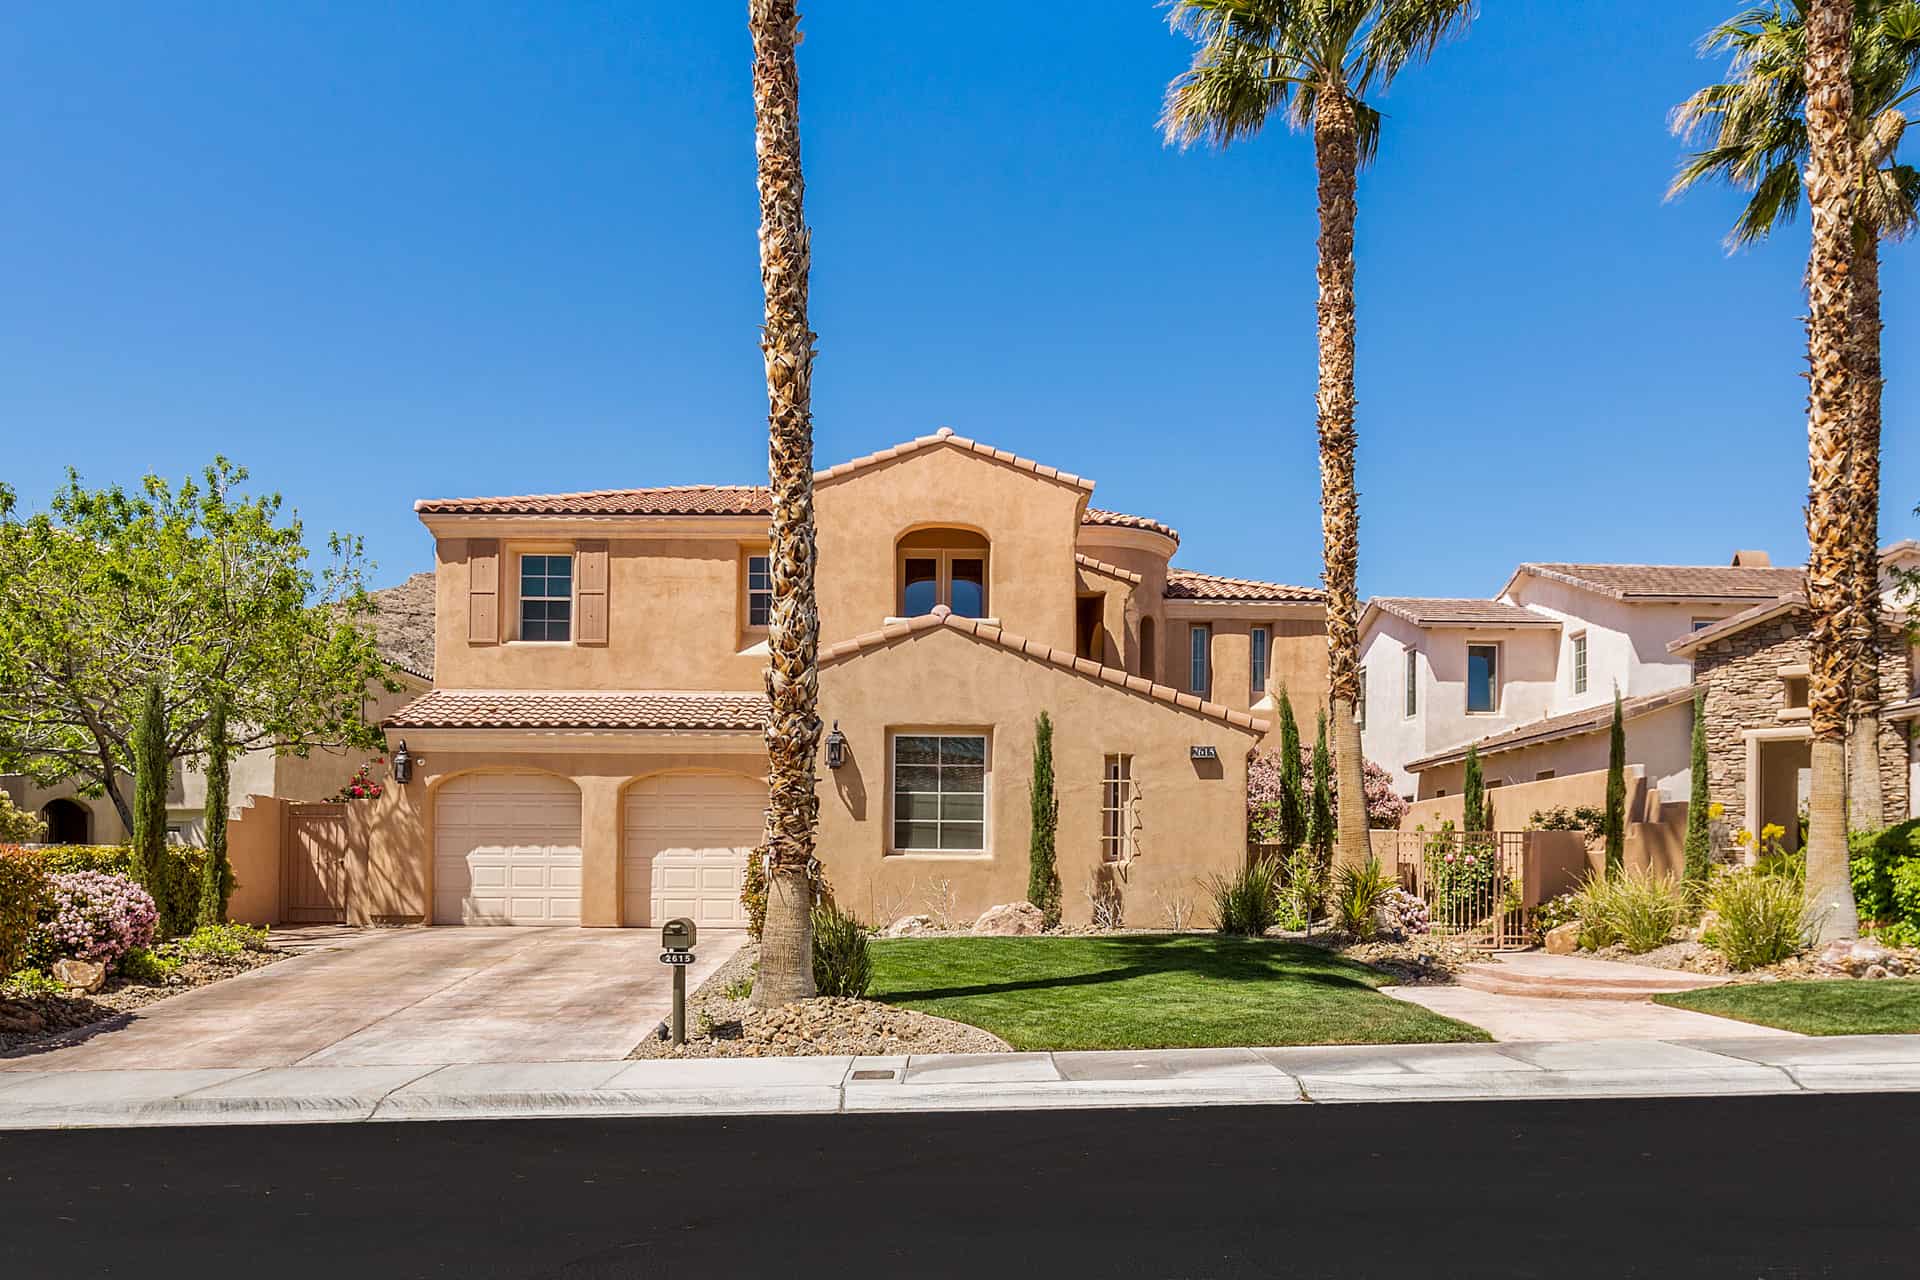 las-vegas-luxry-real-estate-realtor-rob-jensen-company-2615-grassy-spring-place-red-rock-country-club59